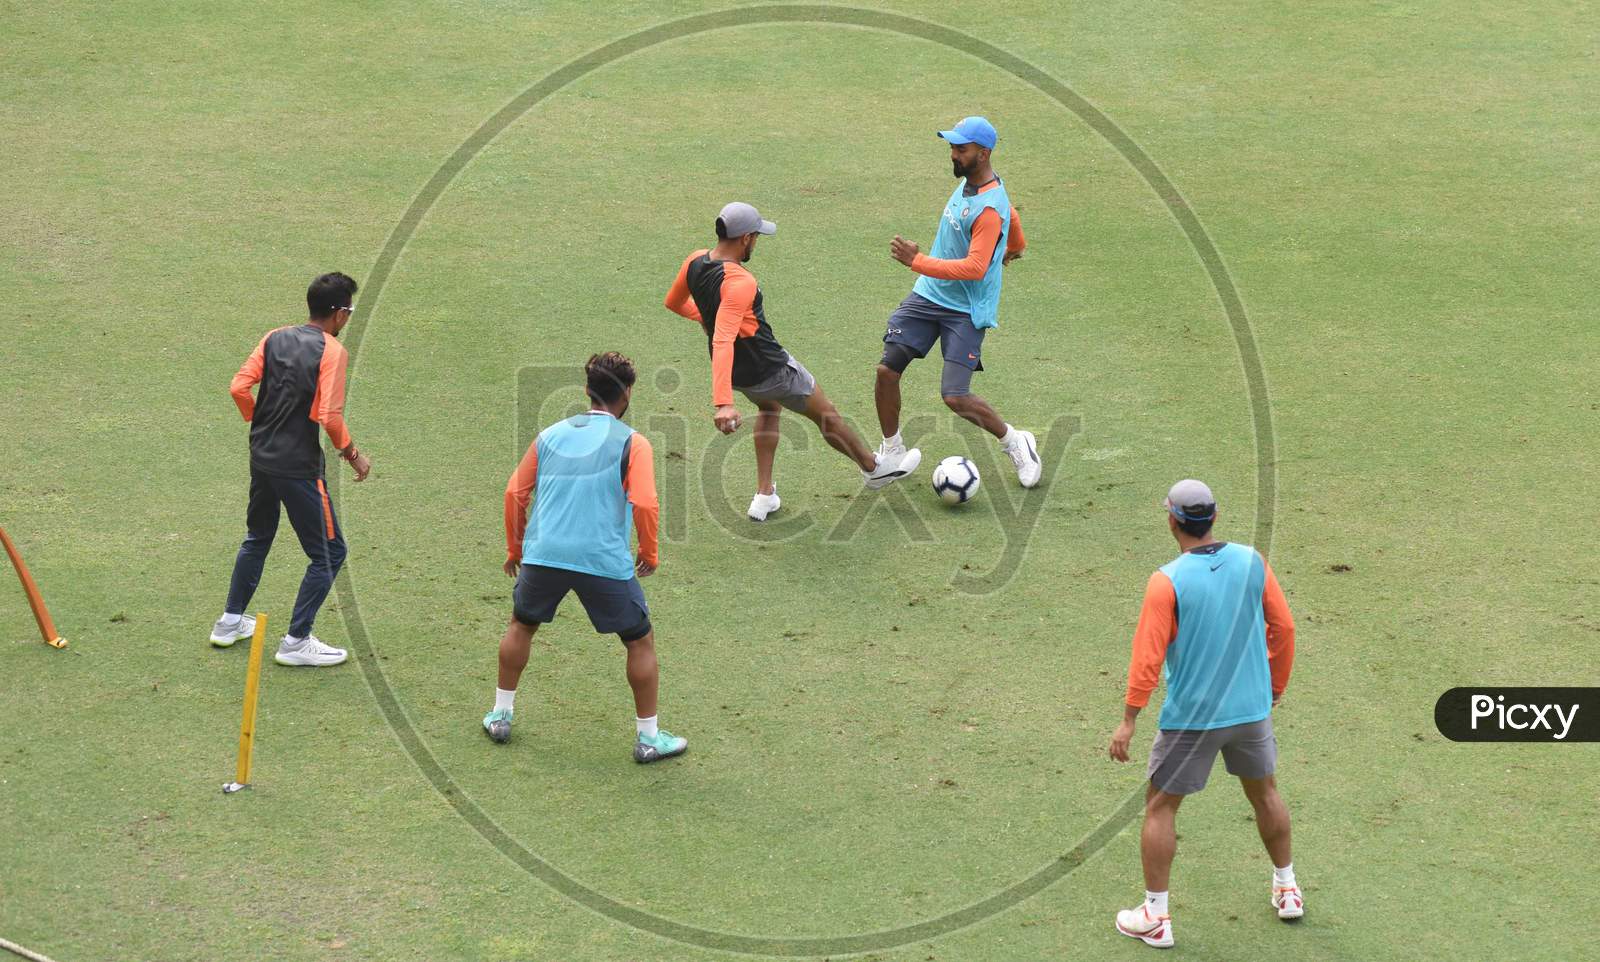 Team India Players Plays Football During A Practice Session Ahead Of The First One Day International Cricket Match Against West Indies, At Aca Cricket Stadium, Barsapara In Guwahati